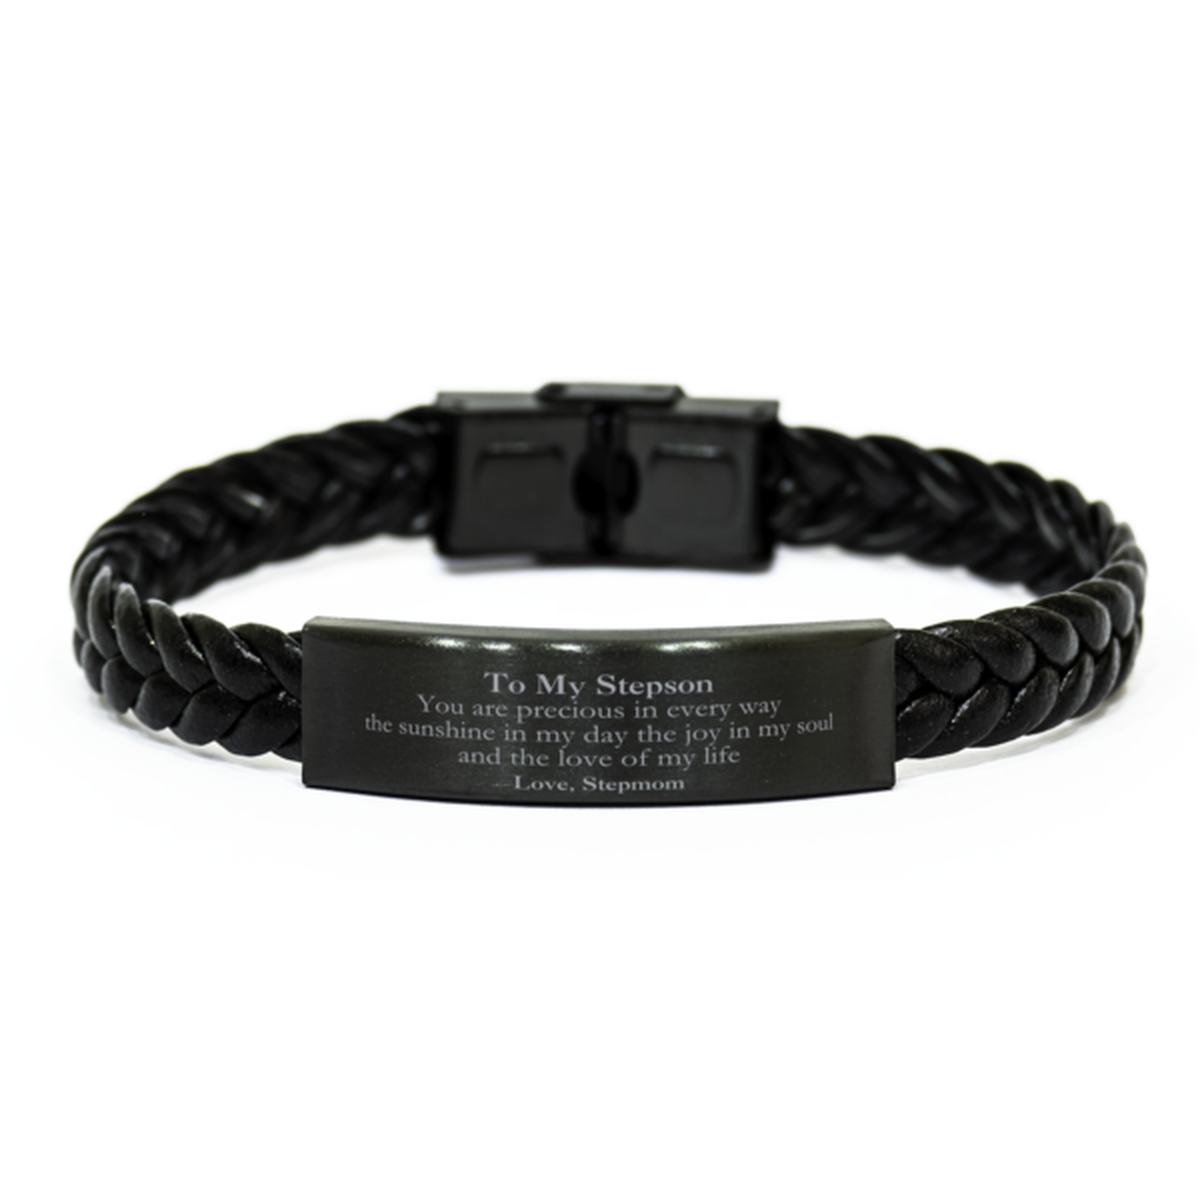 Graduation Gifts for Stepson Braided Leather Bracelet Present from Stepmom, Christmas Stepson Birthday Gifts Stepson You are precious in every way the sunshine in my day. Love, Stepmom